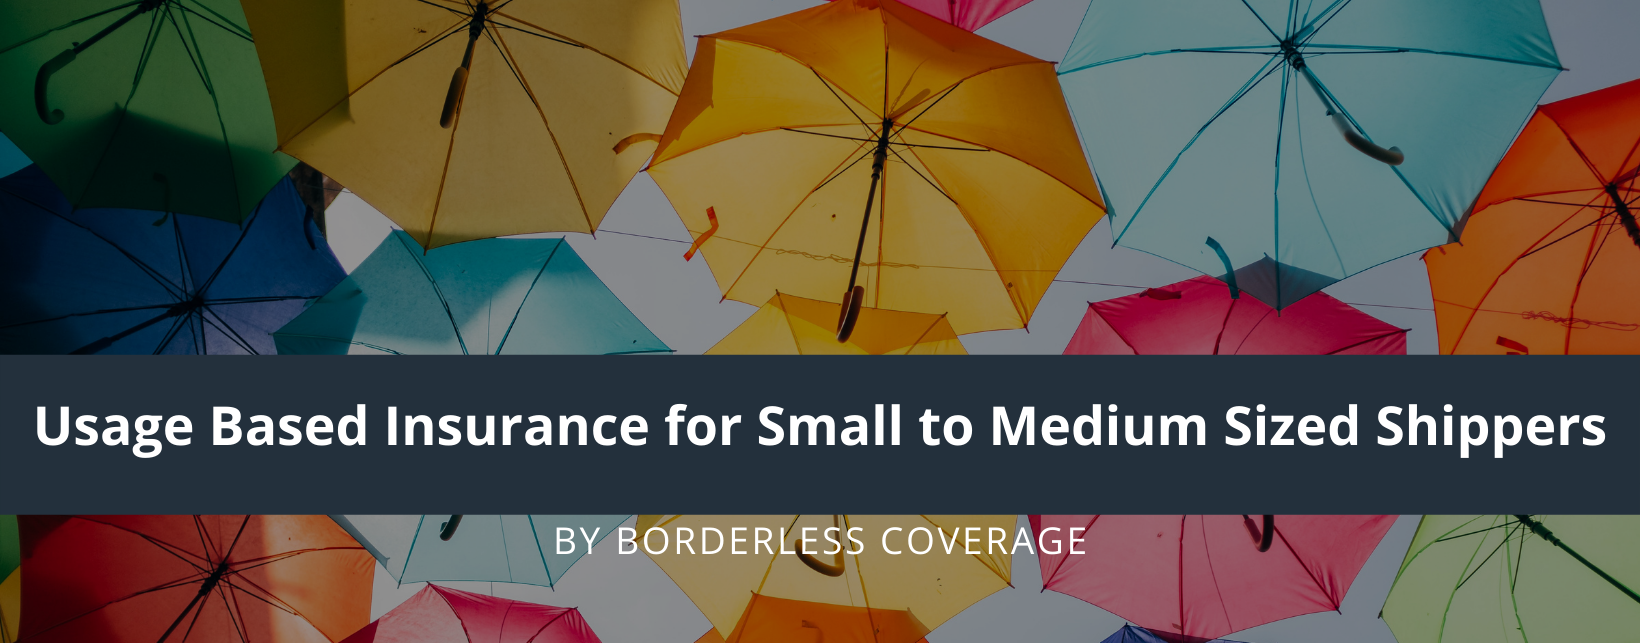 Usage Based Insurance for Small to Medium Sized Shippers